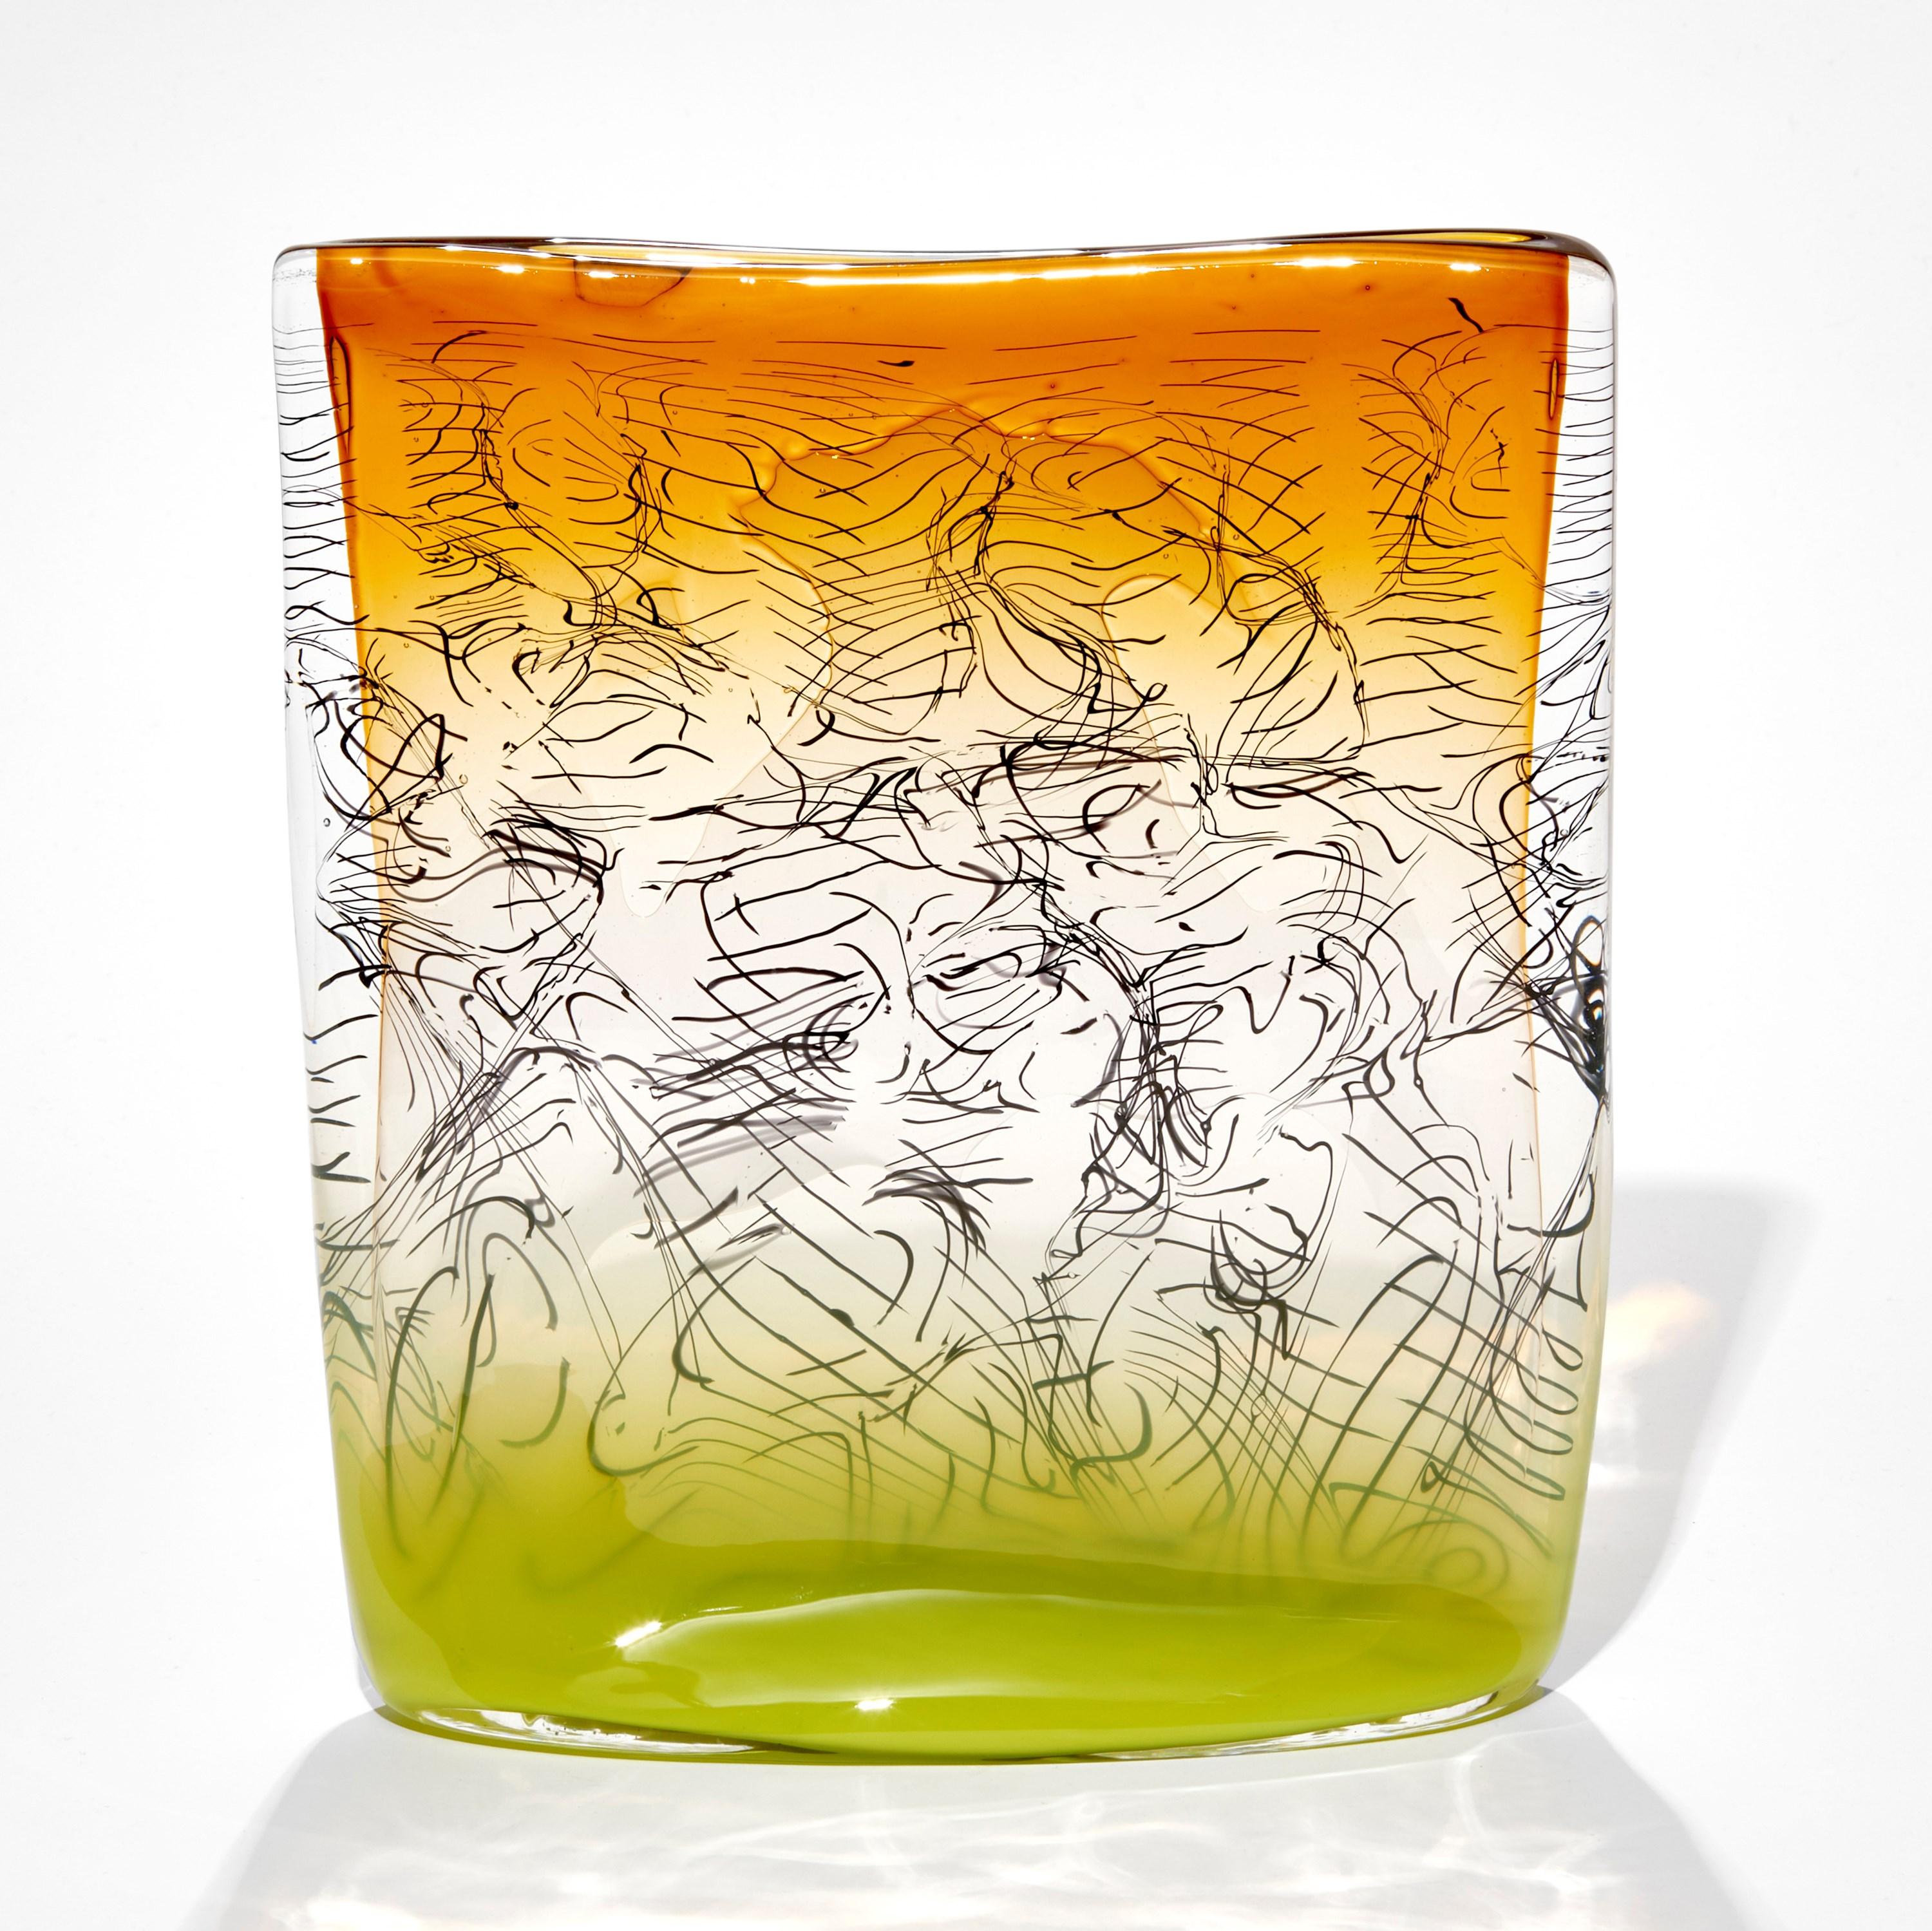 'Cryptograph 210631' (in Amber & Chartreuse) is a unique glass sculpture that has been created using a variety of glass techniques, by the British artist, Louis Thompson.

The encased lines of 'script' are first created by carving a pre-made glass